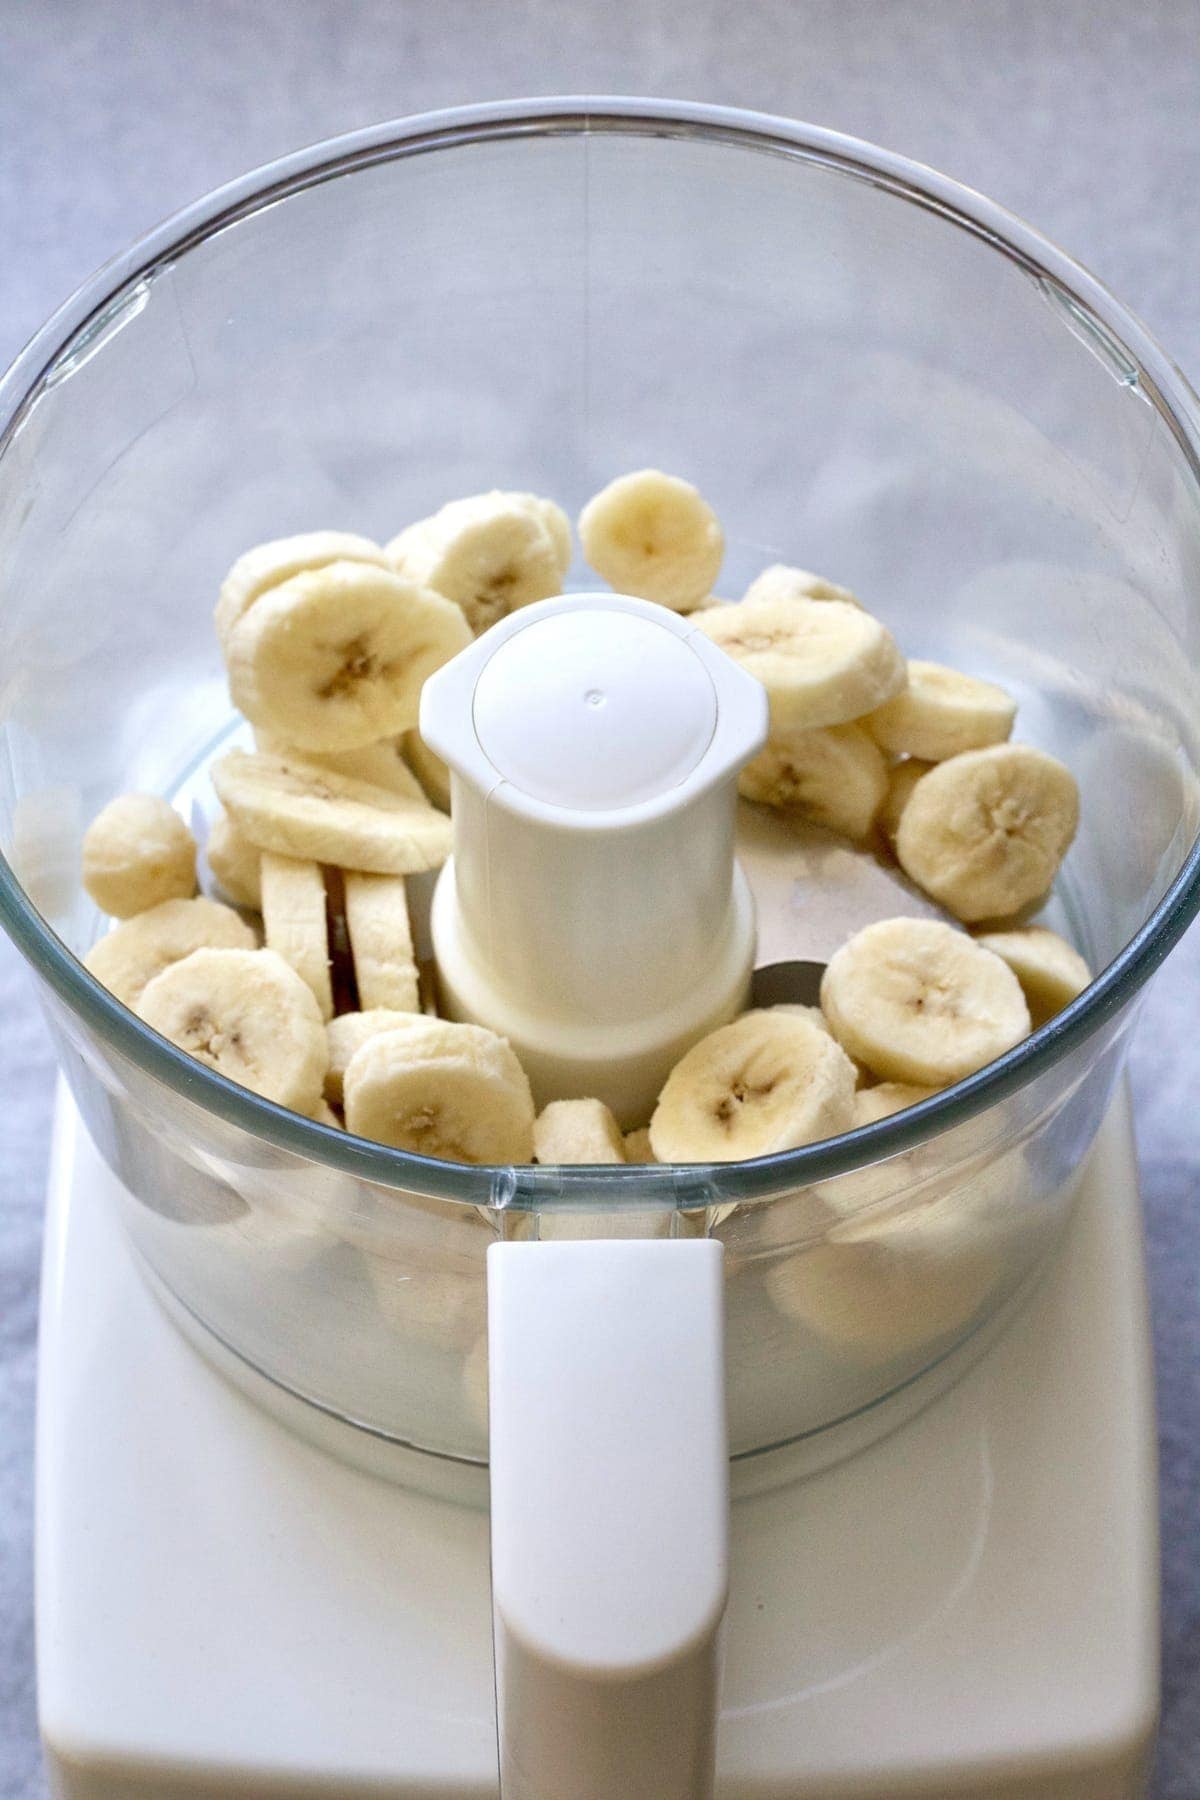 Banana slices in a food processor.